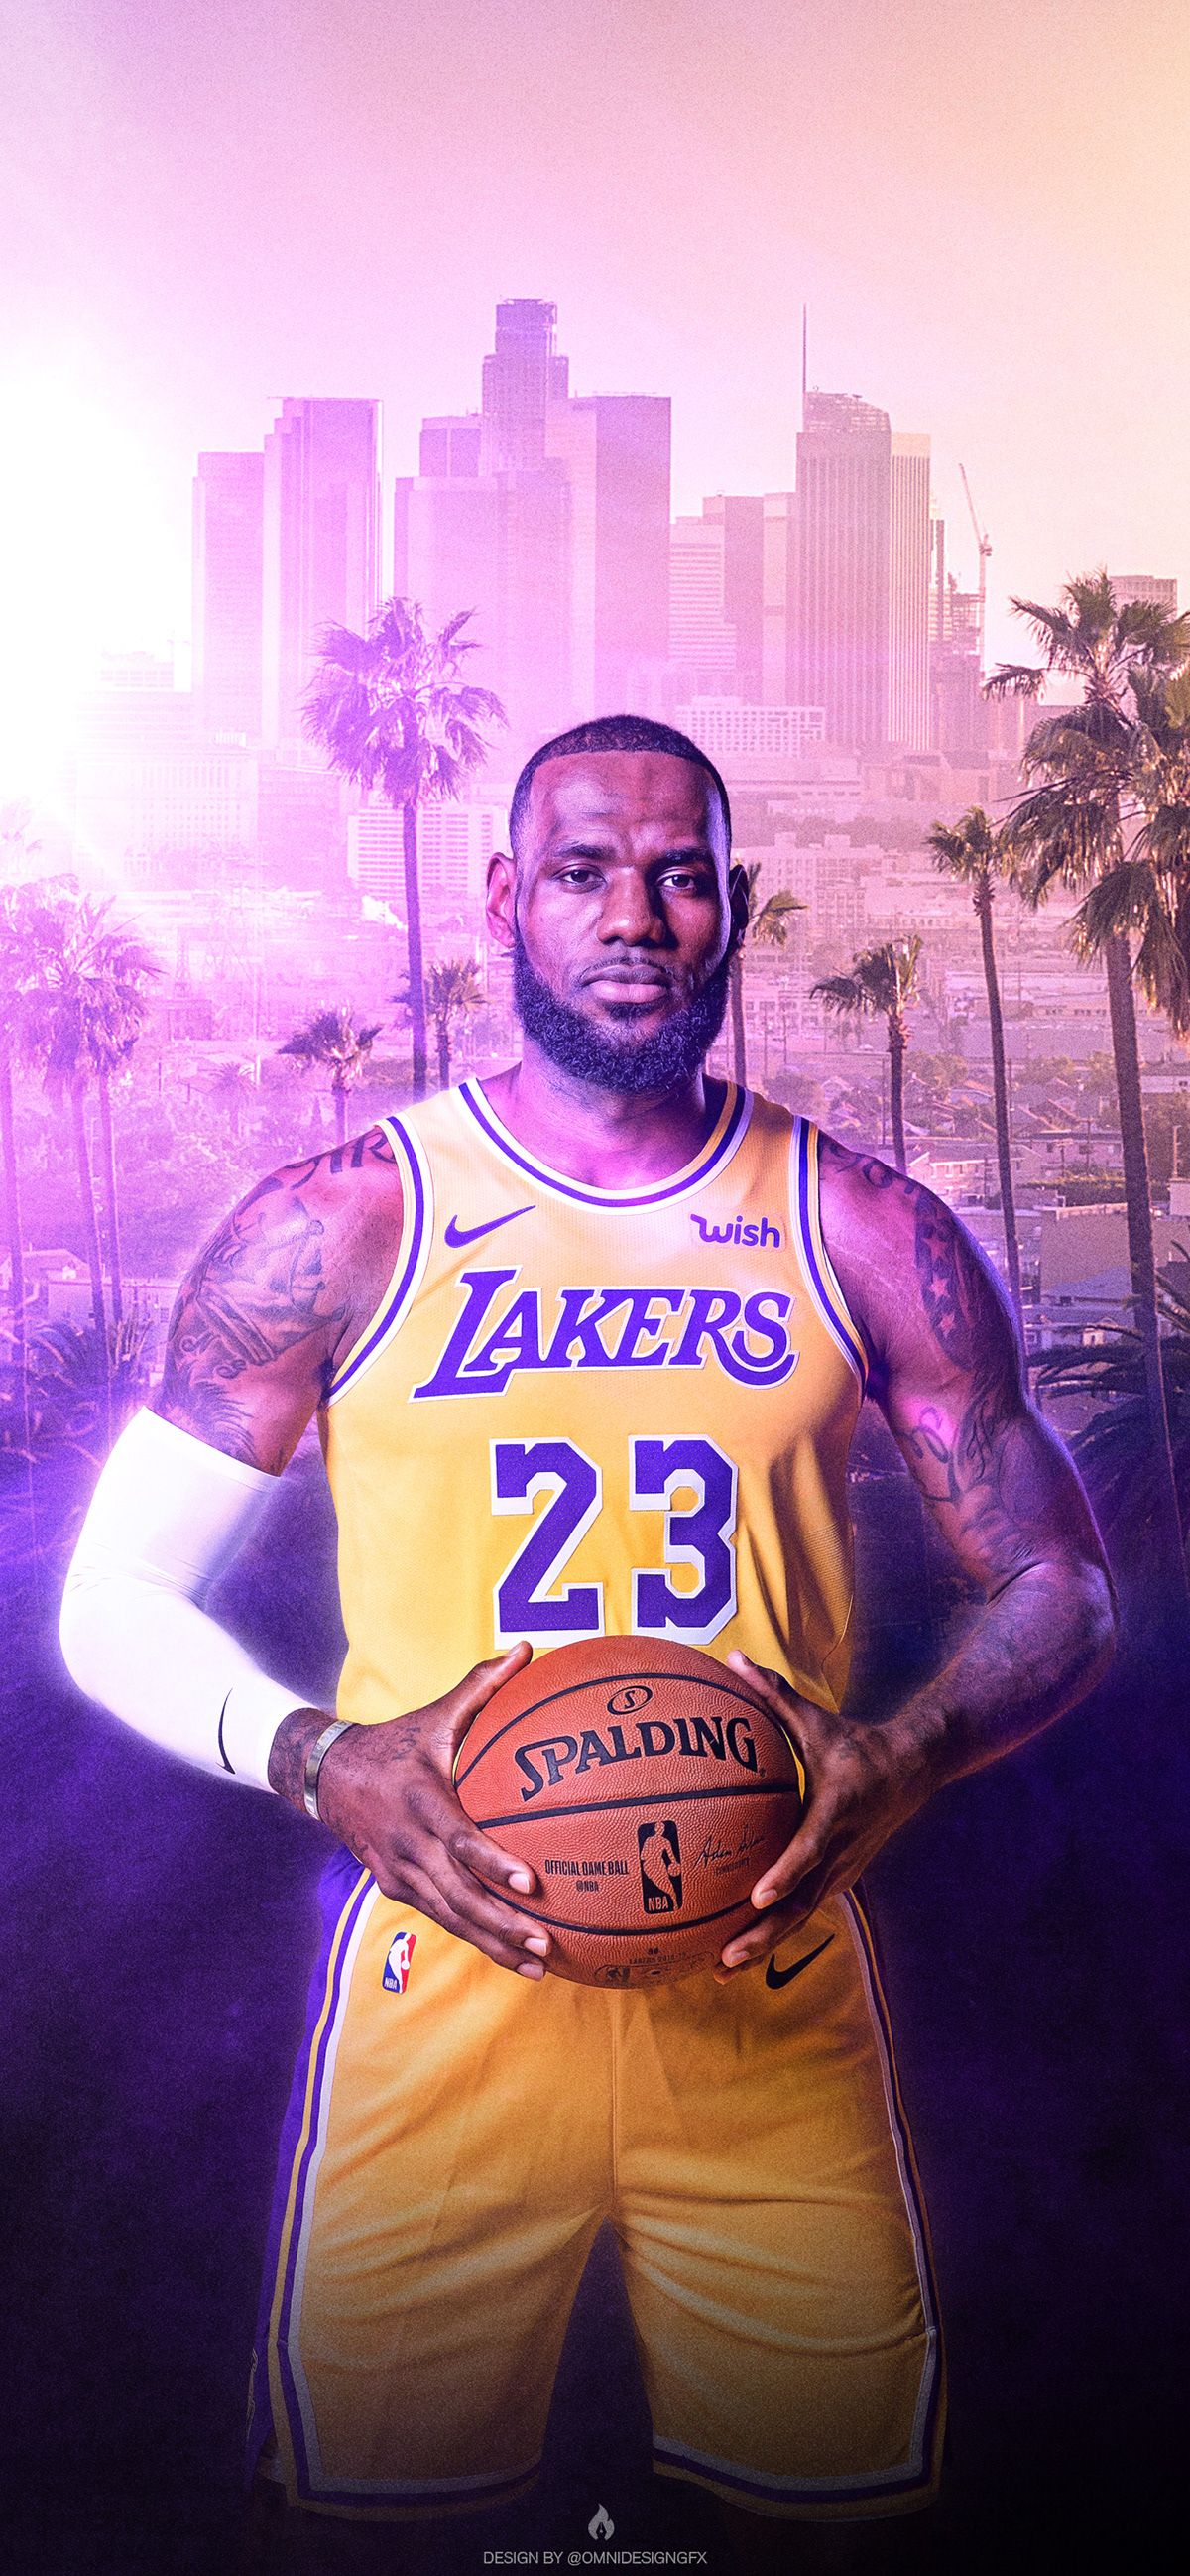 Download wallpapers LeBron James 4k violet neon lights Fortnite Battle  Royale Fortnite characters LeBron James Skin Fortnite LeBron James  Fortnite for desktop with resolution 3840x2400 High Quality HD pictures  wallpapers